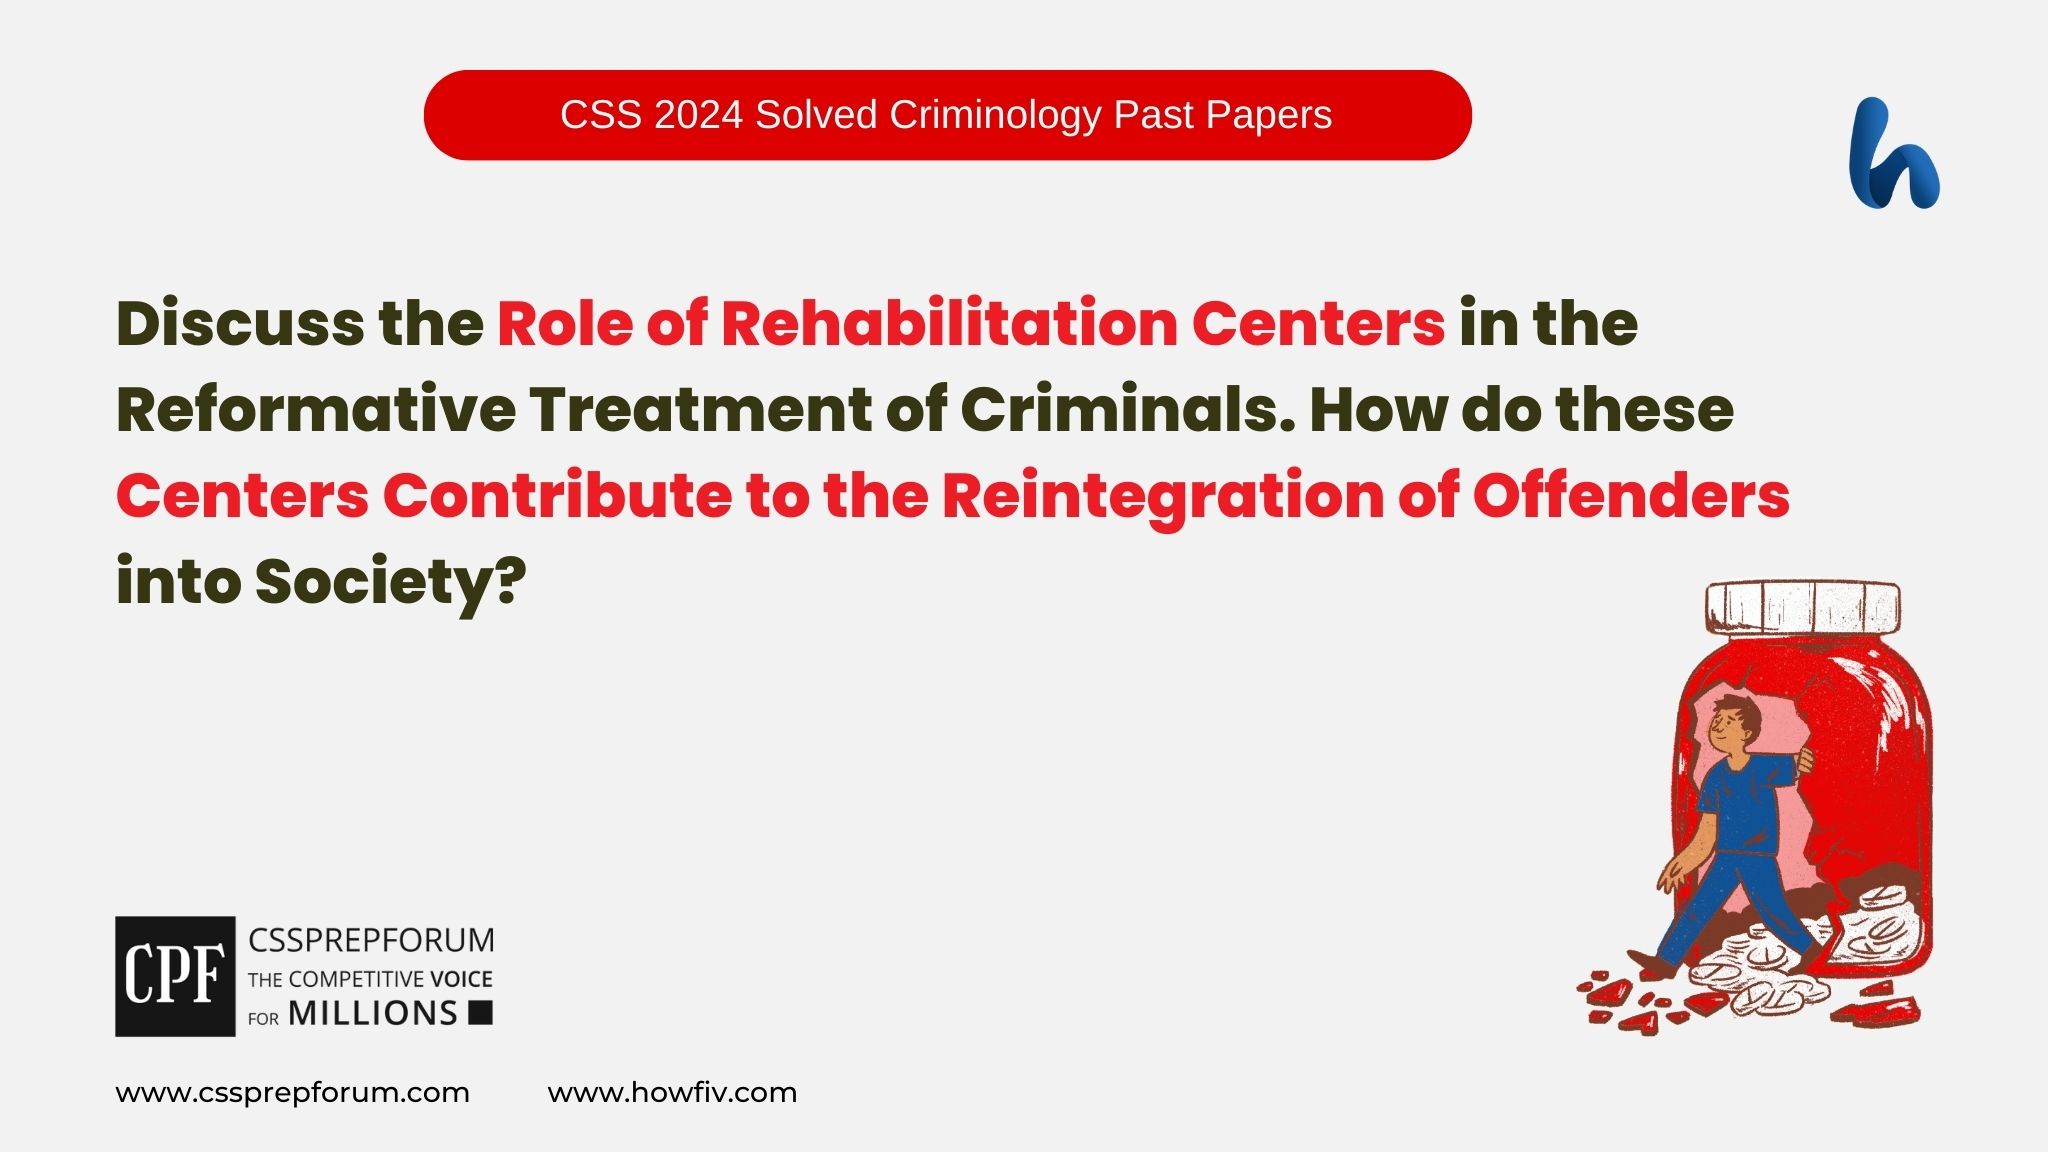 Discuss the Role of Rehabilitation Centers in the Reformative Treatment of Criminals. How do these Centers Contribute to the Reintegration of Offenders into Society